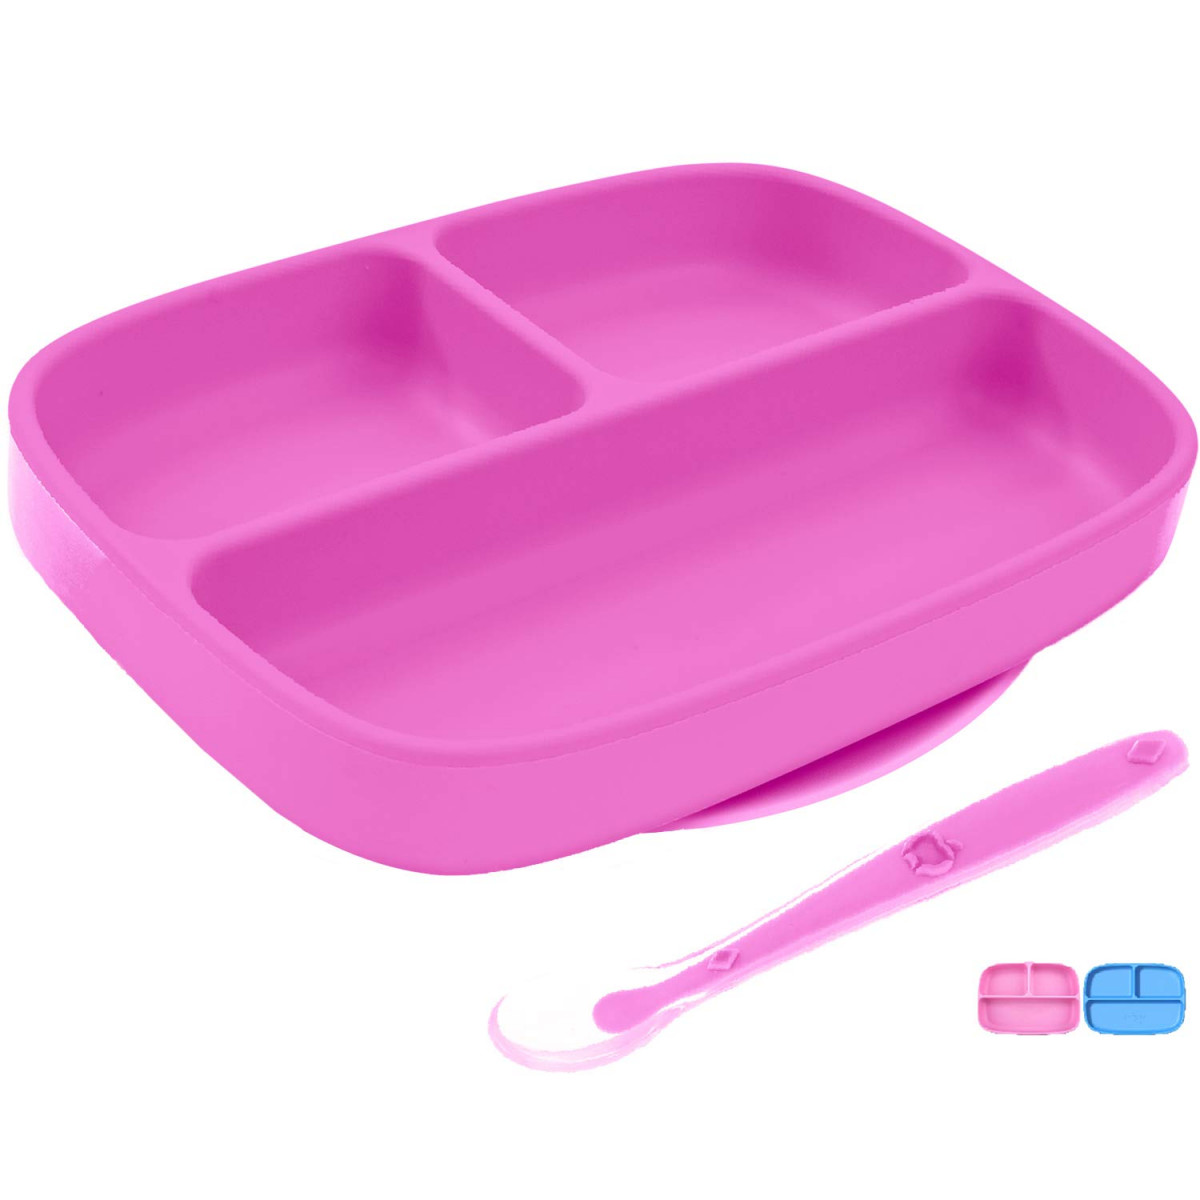 Silicone Baby Toddler Bowls Non Slip Stay Put Suction Grip Dish Premium Plates Safe and Durable Pink